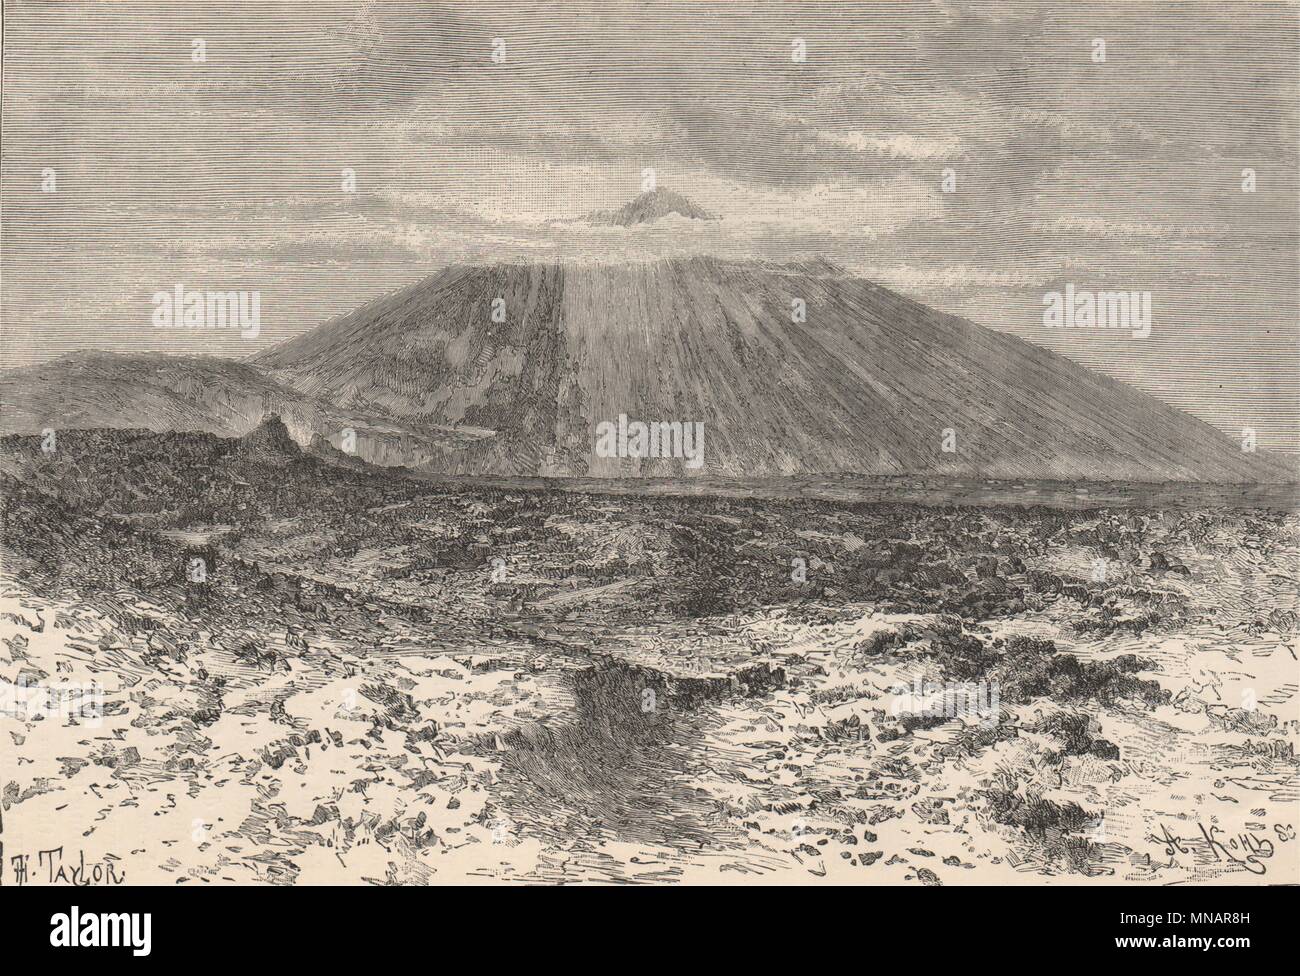 Peak/Pico of Teide, Tenerife - View from the Canadas of the Guanches 1885 Stock Photo